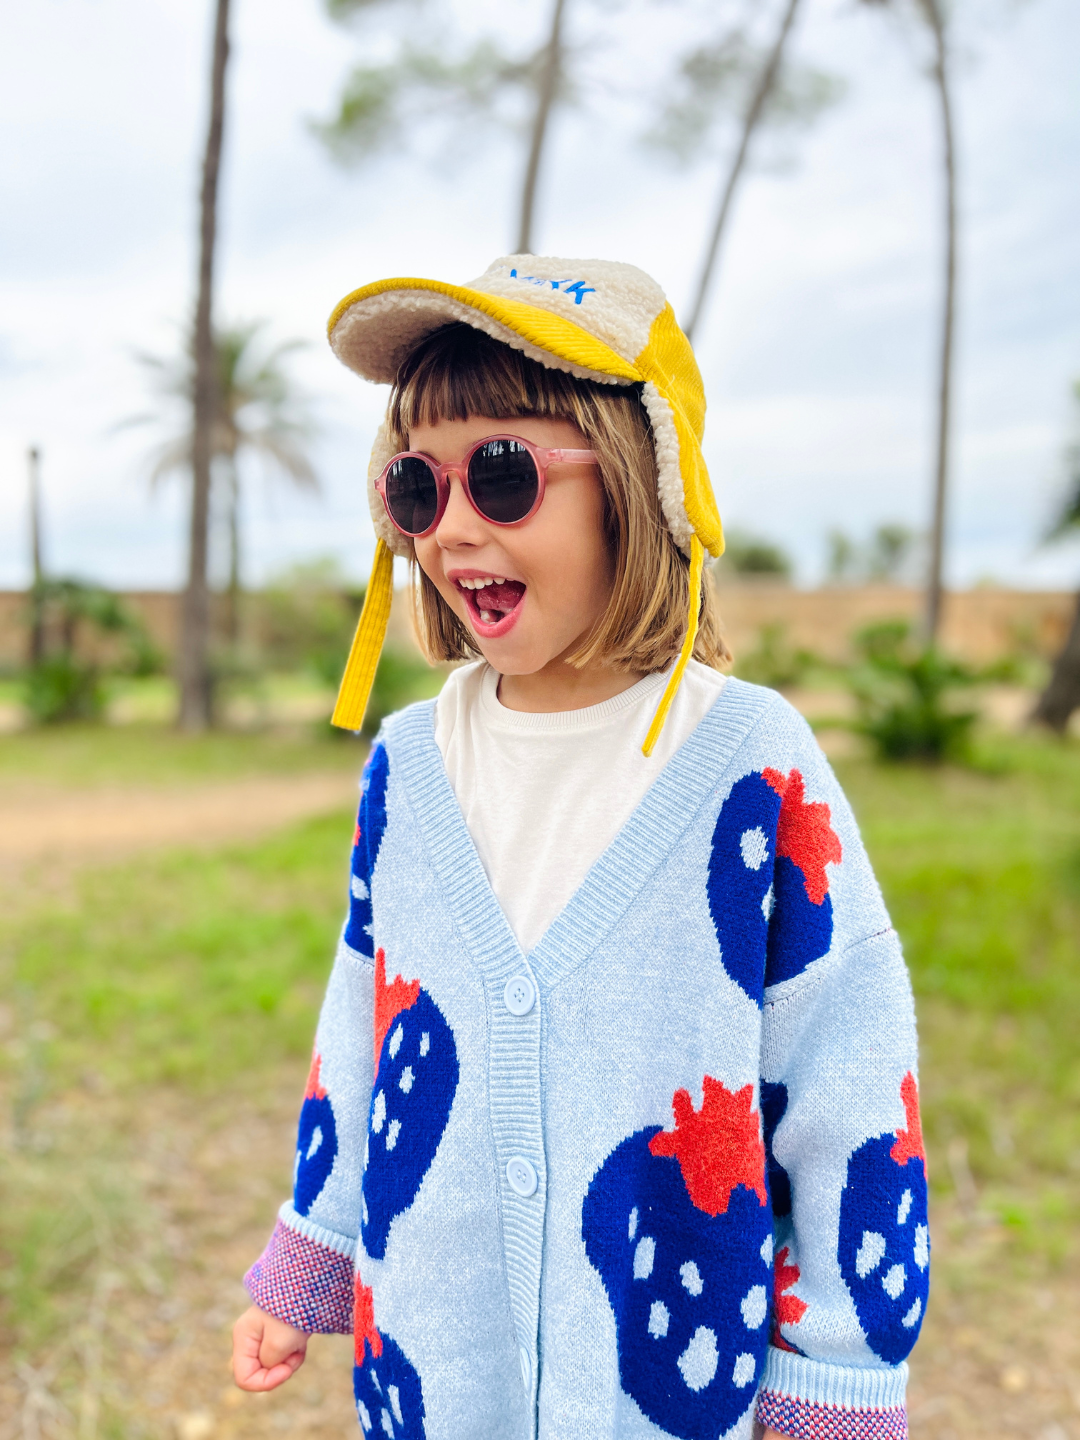 Sky | A girl wearing a kids v-neck cardigan in light blue with an all-over pattern of large blue strawberries with a red leaf, in an oversized fit. She is standing in a green park with palm trees in the distance, and wearing a white t-shirt, a yellow cap with ear flaps, and pink sunglasses.